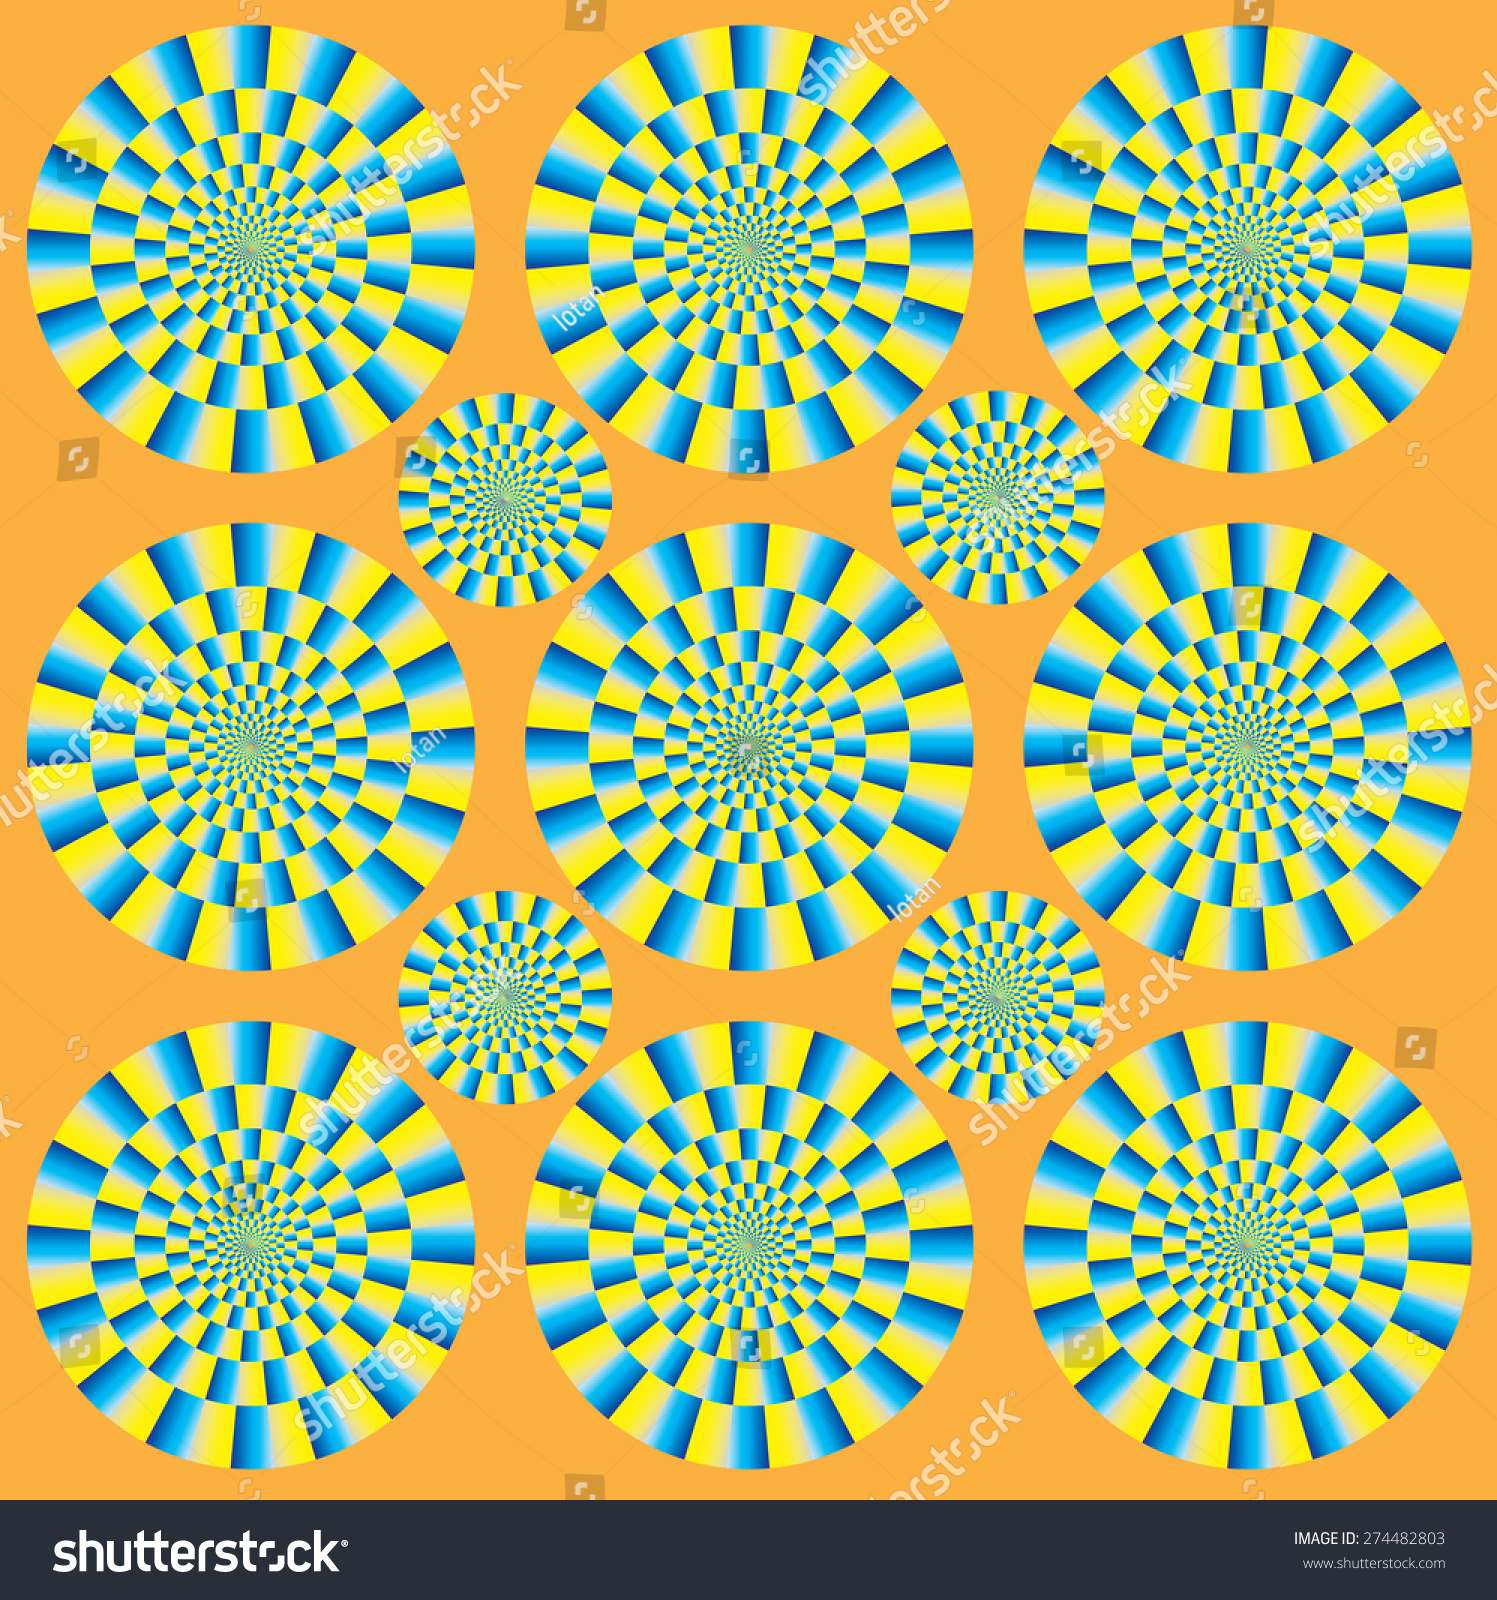 Hypnotic Show Of Rotation. Spin Circles (Motion Illusion). Optical ...